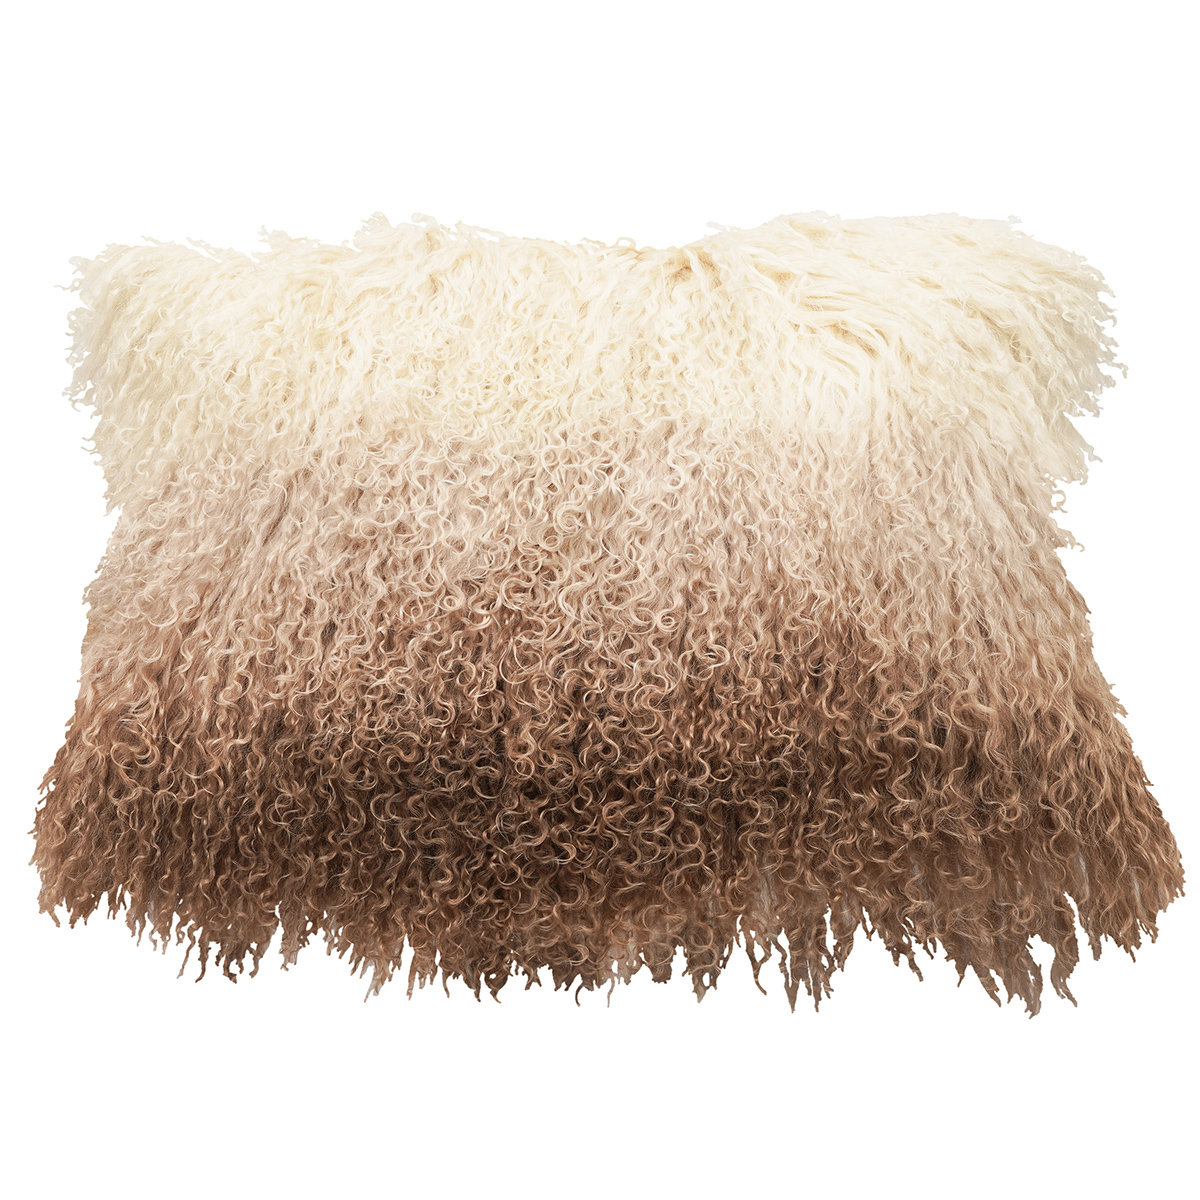 Luxurious Real Fur Blankets, Throws & Pillows made with Authentic Toscana  Sheep Fur